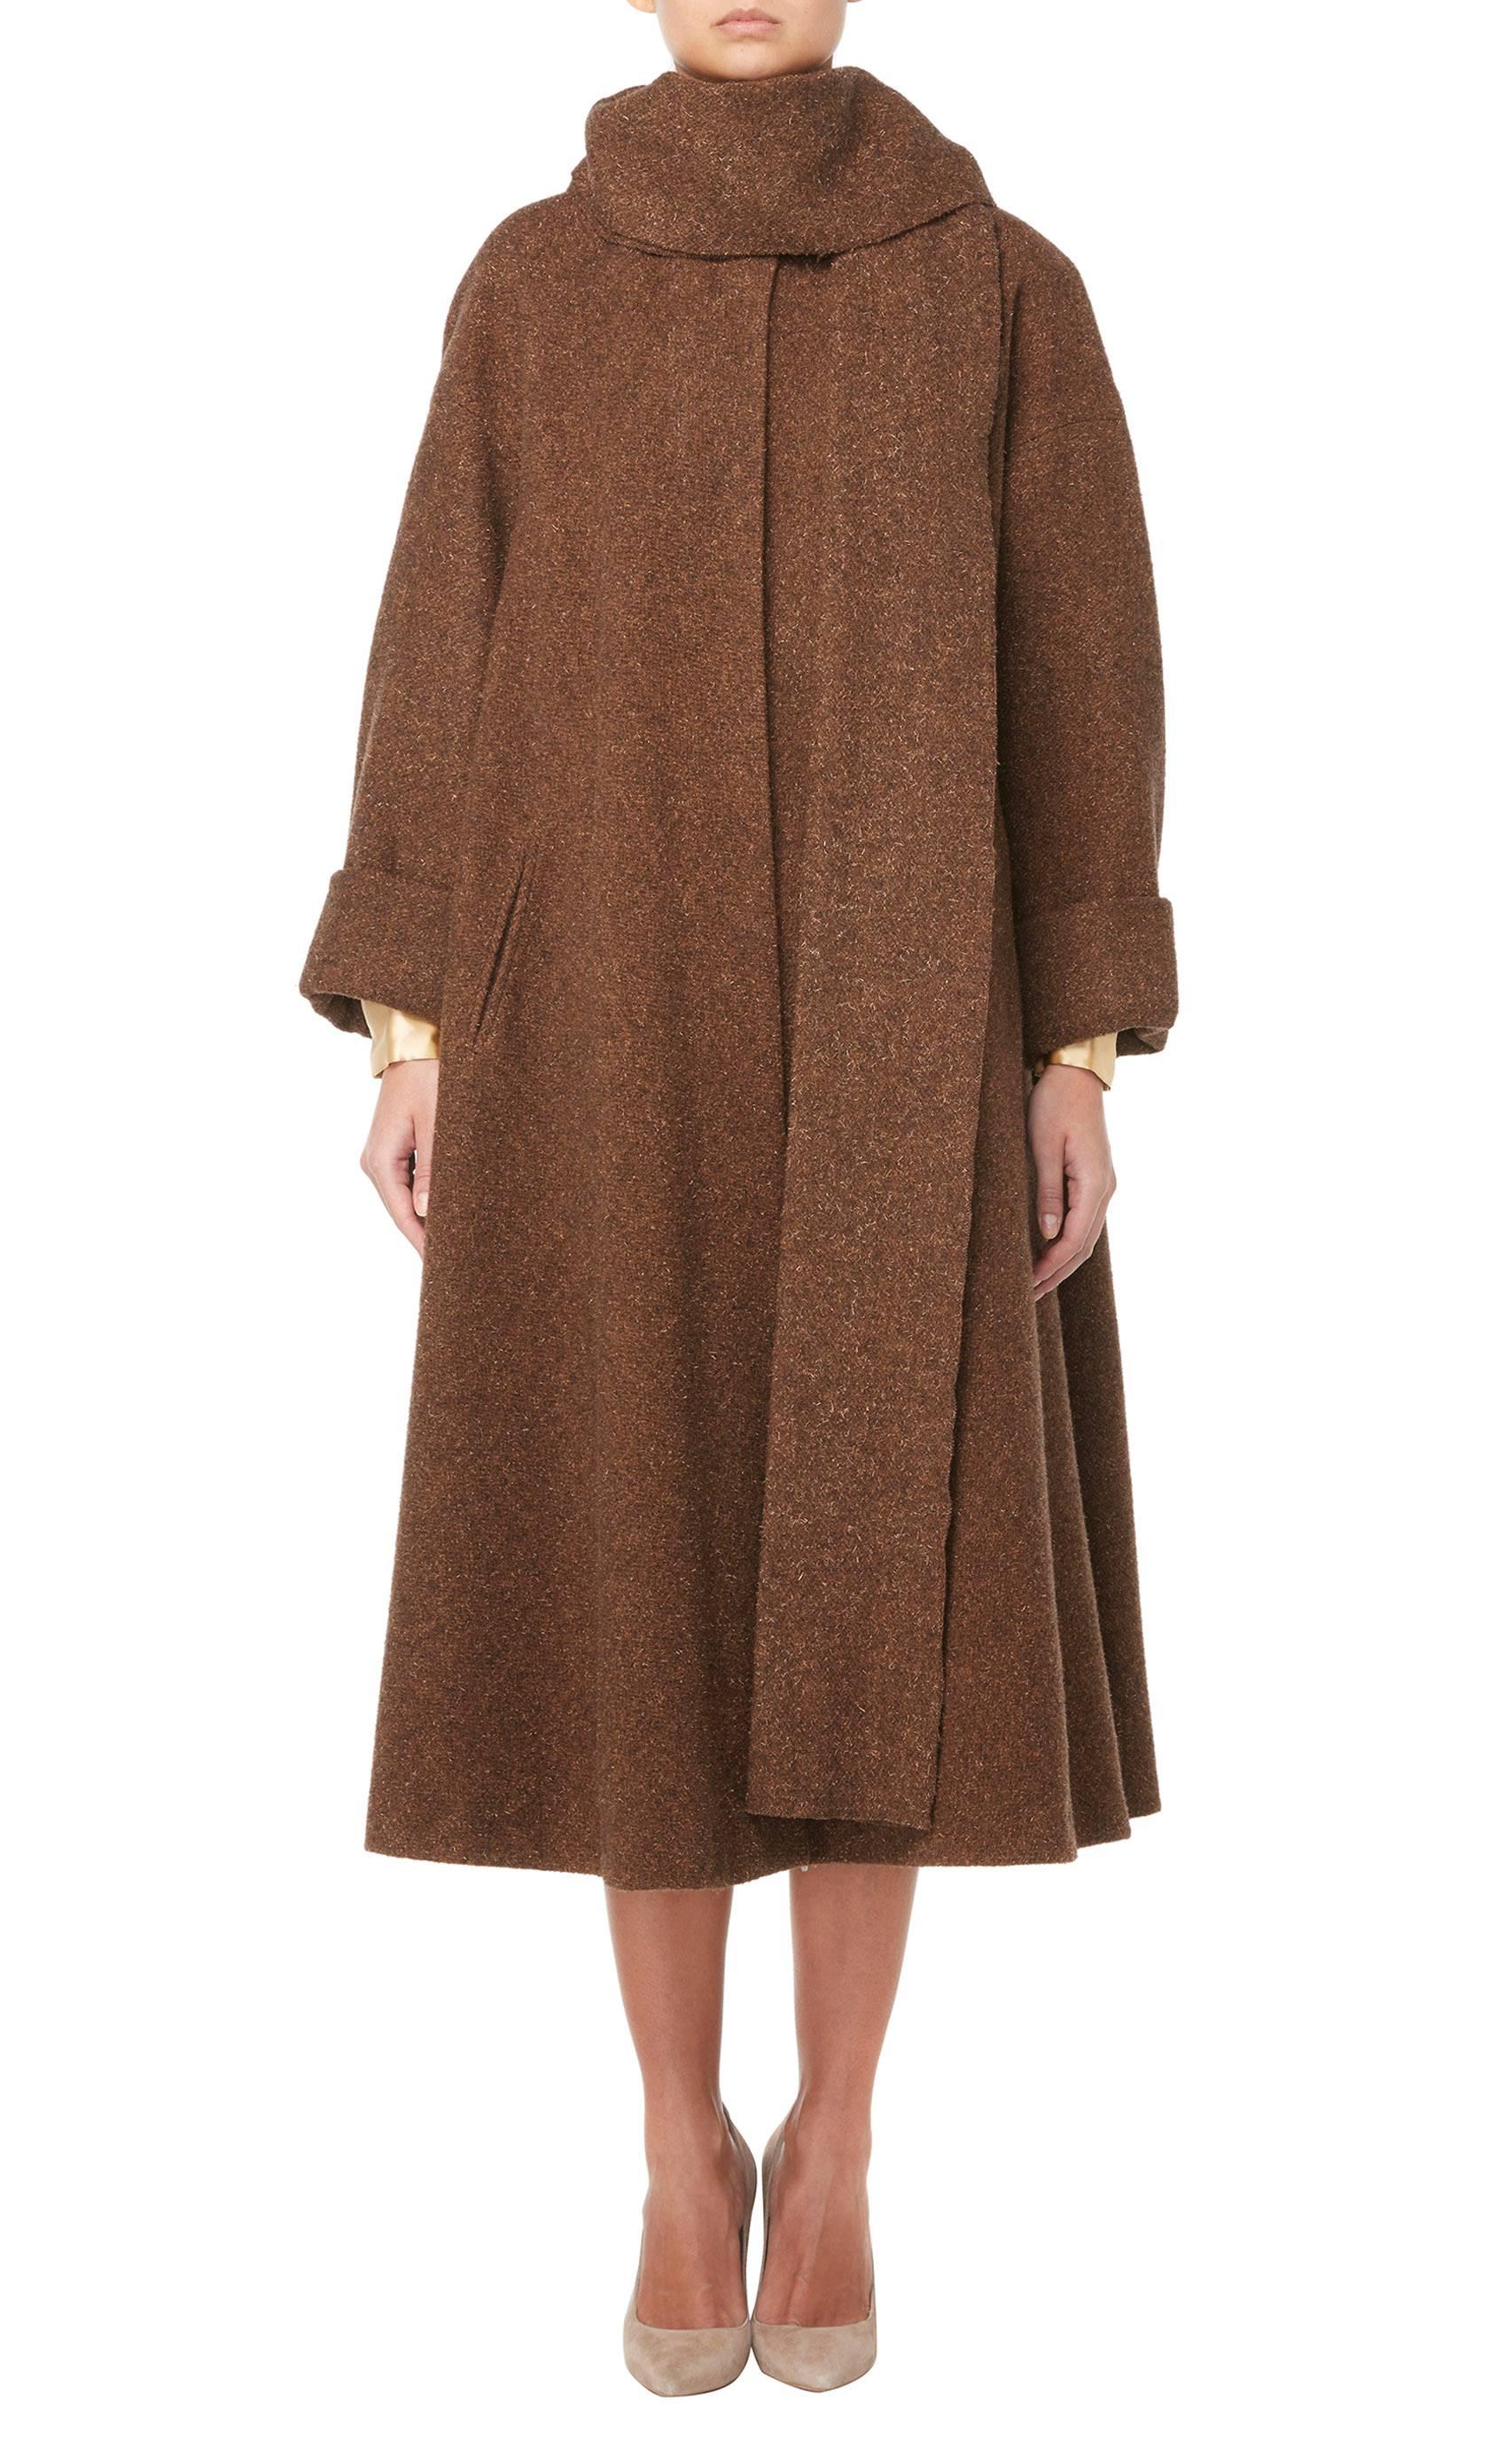 Comprising of a brown wool coat, matching skirt and gold silk shirt, this fabulous Guy Laroche haute couture three-piece is amazingly versatile. The shirt features pin tuck detailing and has a loose cut for a blouson shape, while the skirt is fitted